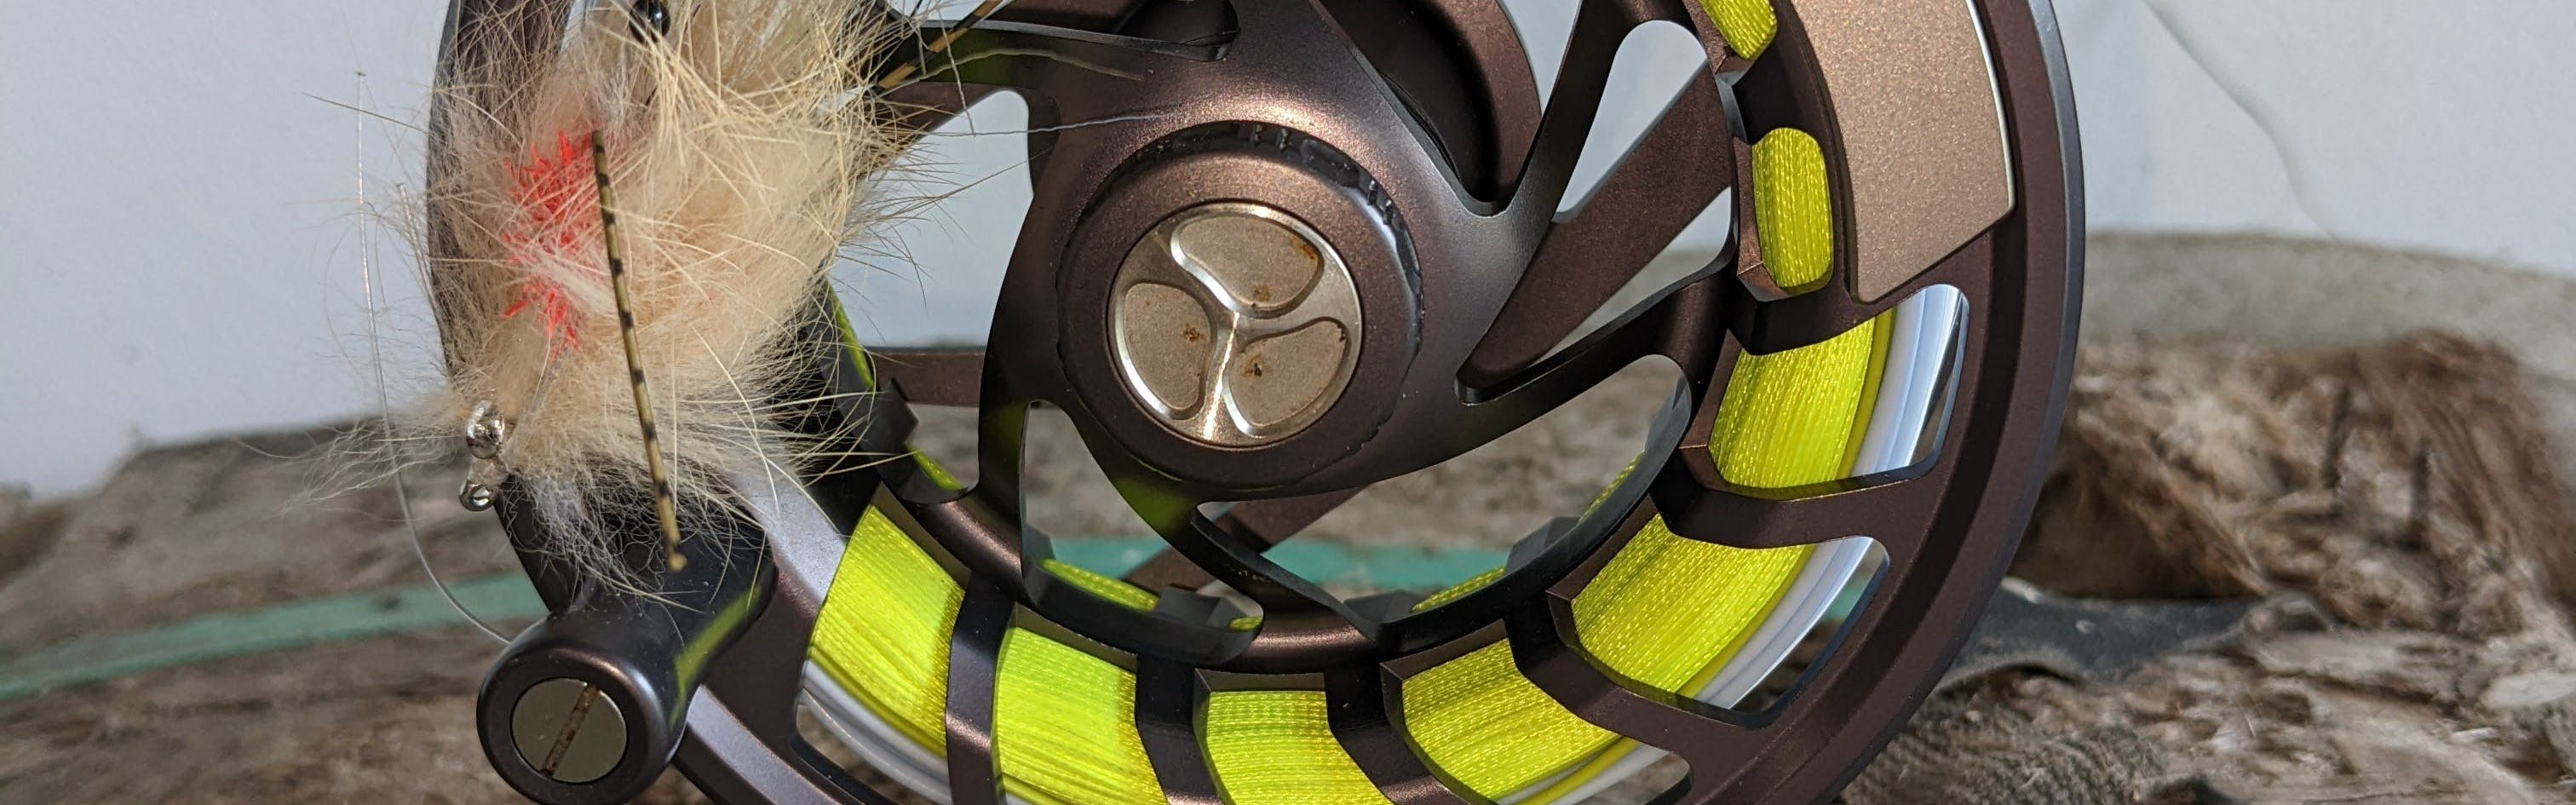 AN ORVIS SPEY FLY FISHING REEL AND A DAIWA WHISKER KEVLAR LIGHT